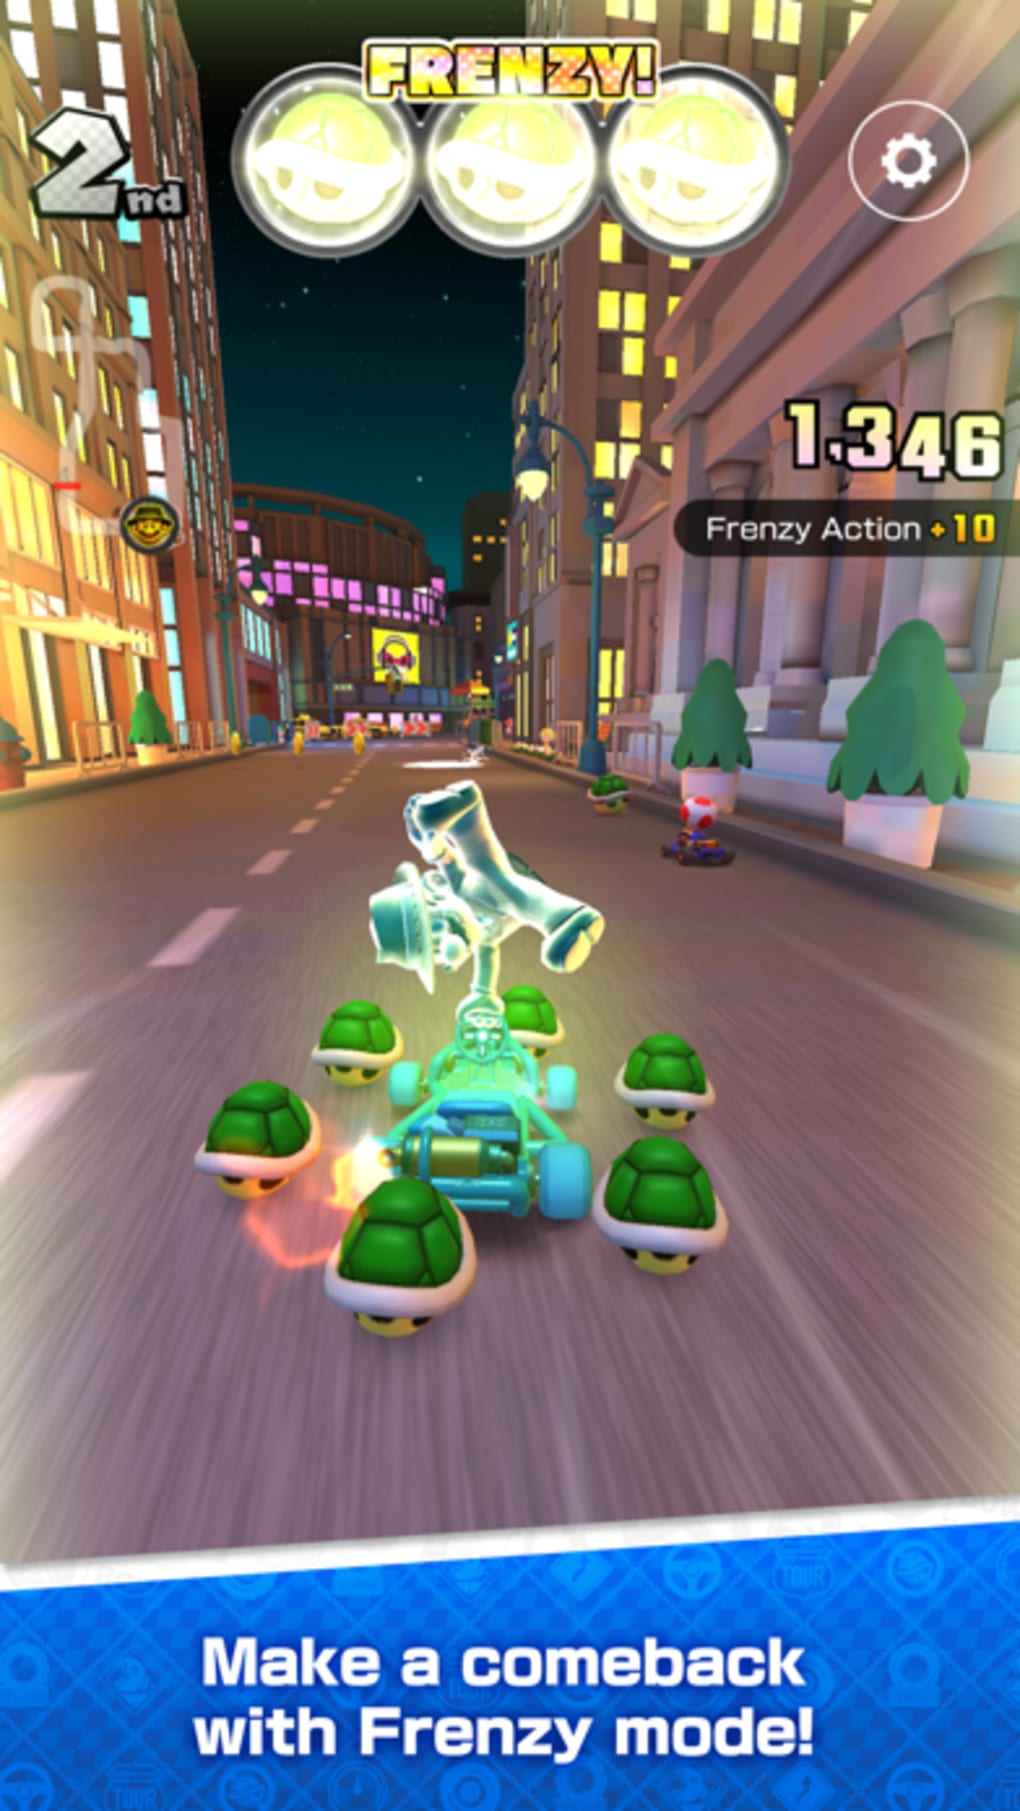 You Can Now Download Mario Kart Tour for iOS in Canada Ahead of